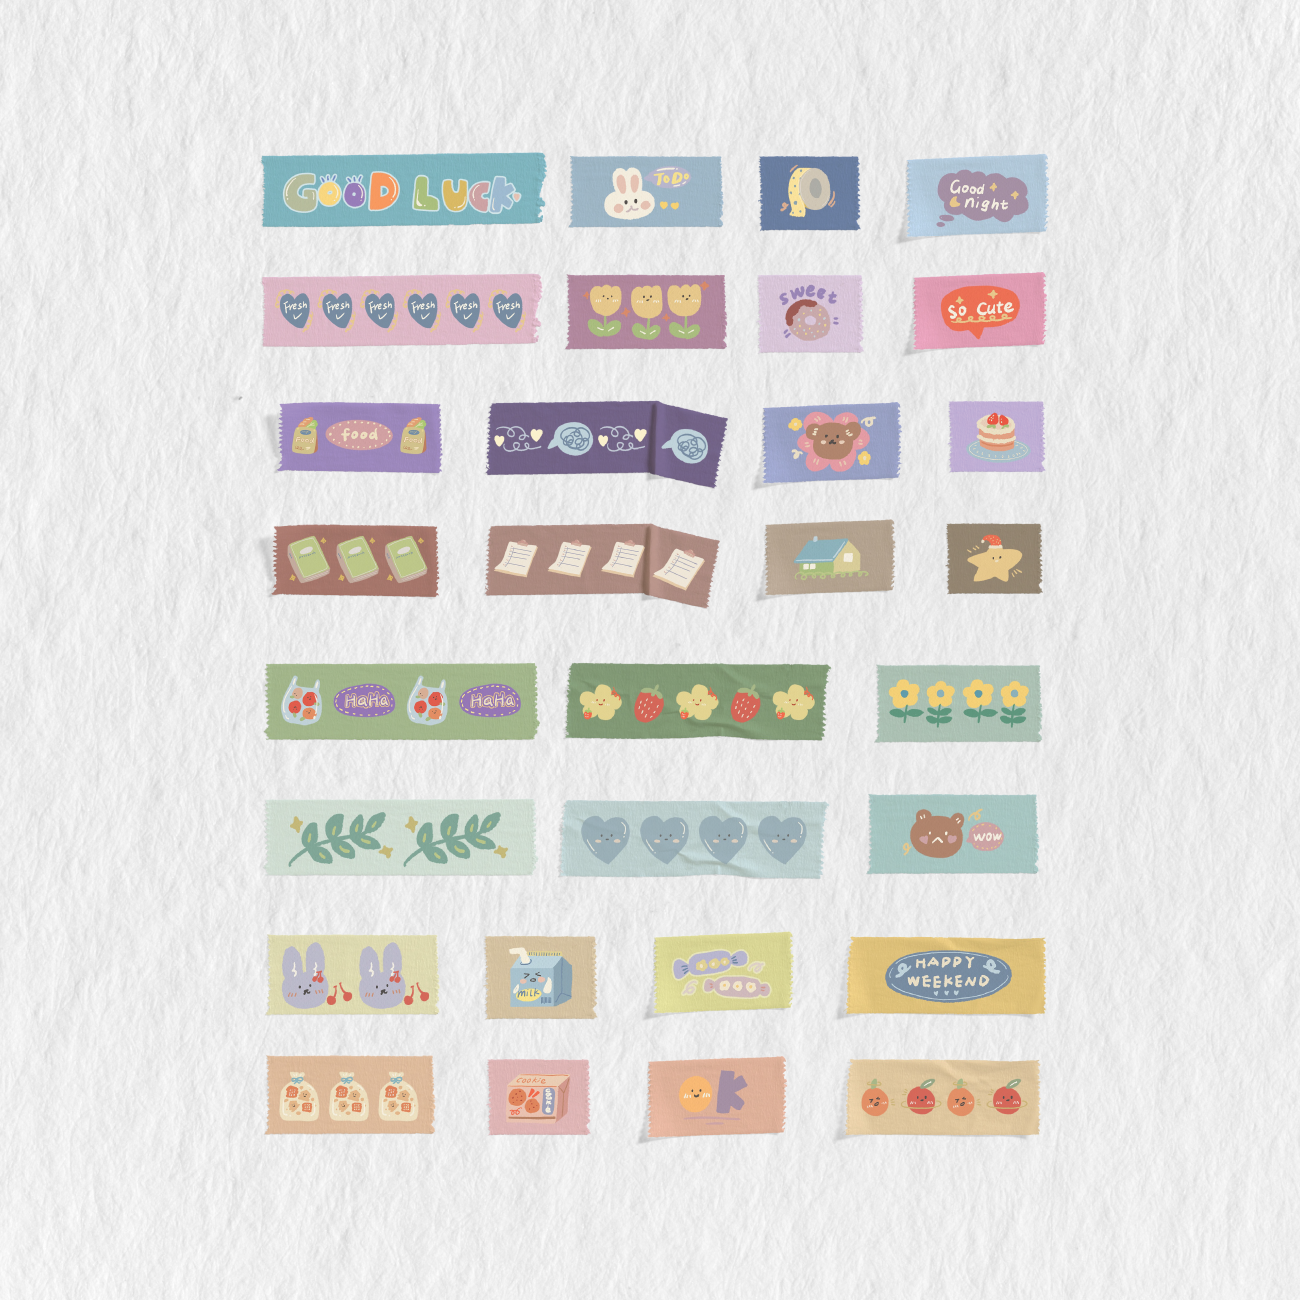 390 Cute Digital Daily Stickers Pack — Stationery Pal